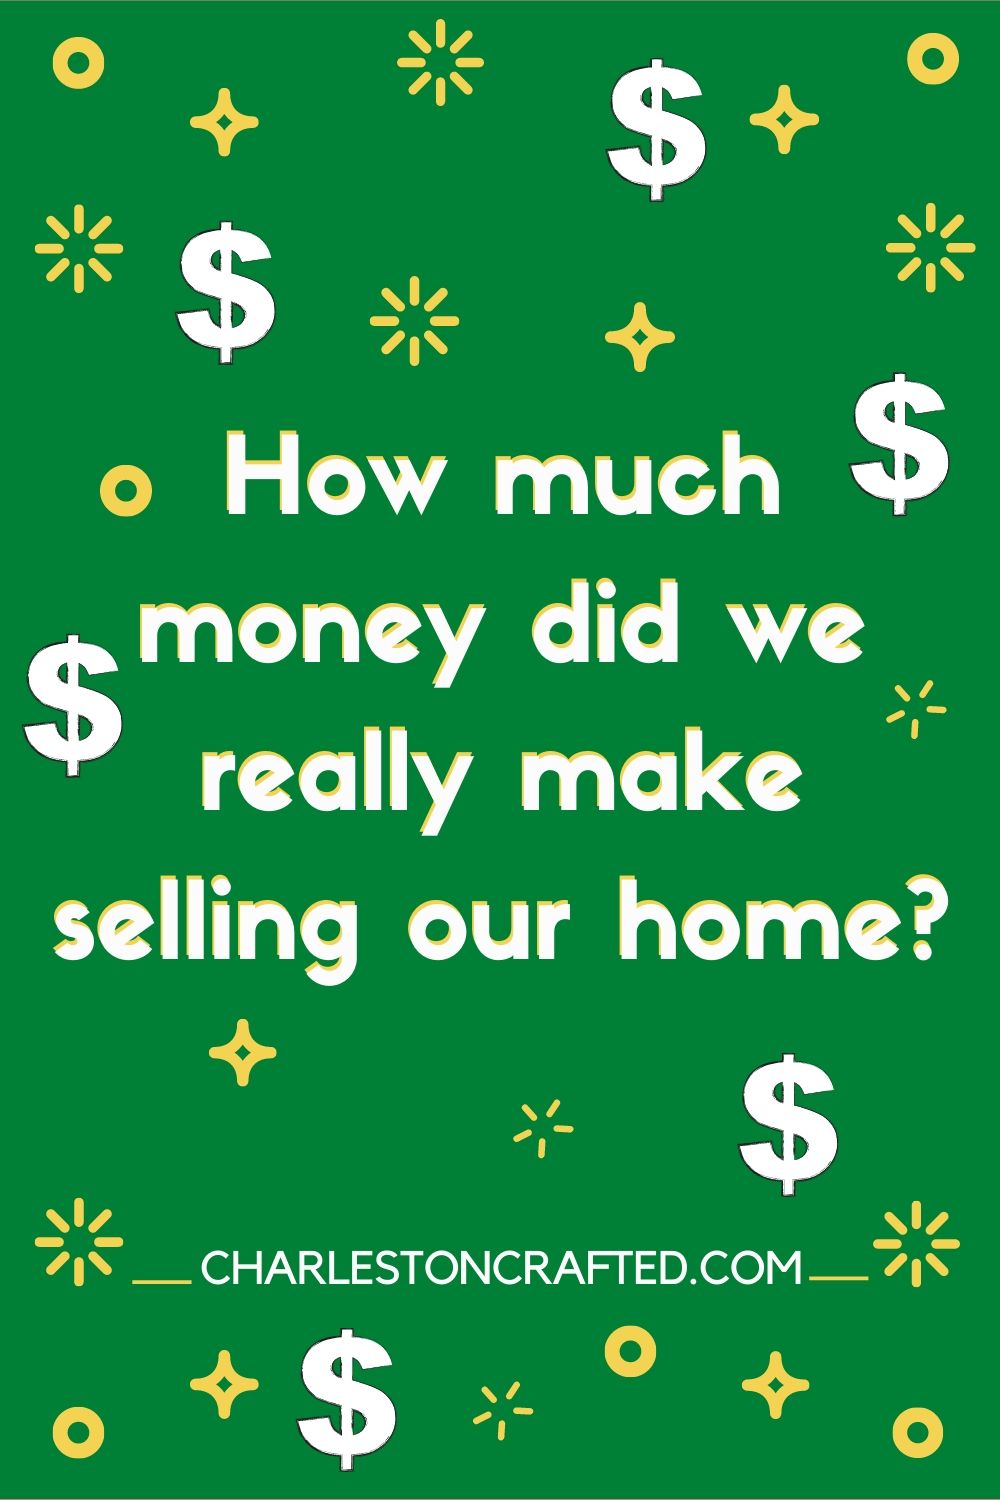 How much money did we make on the sale of our home?